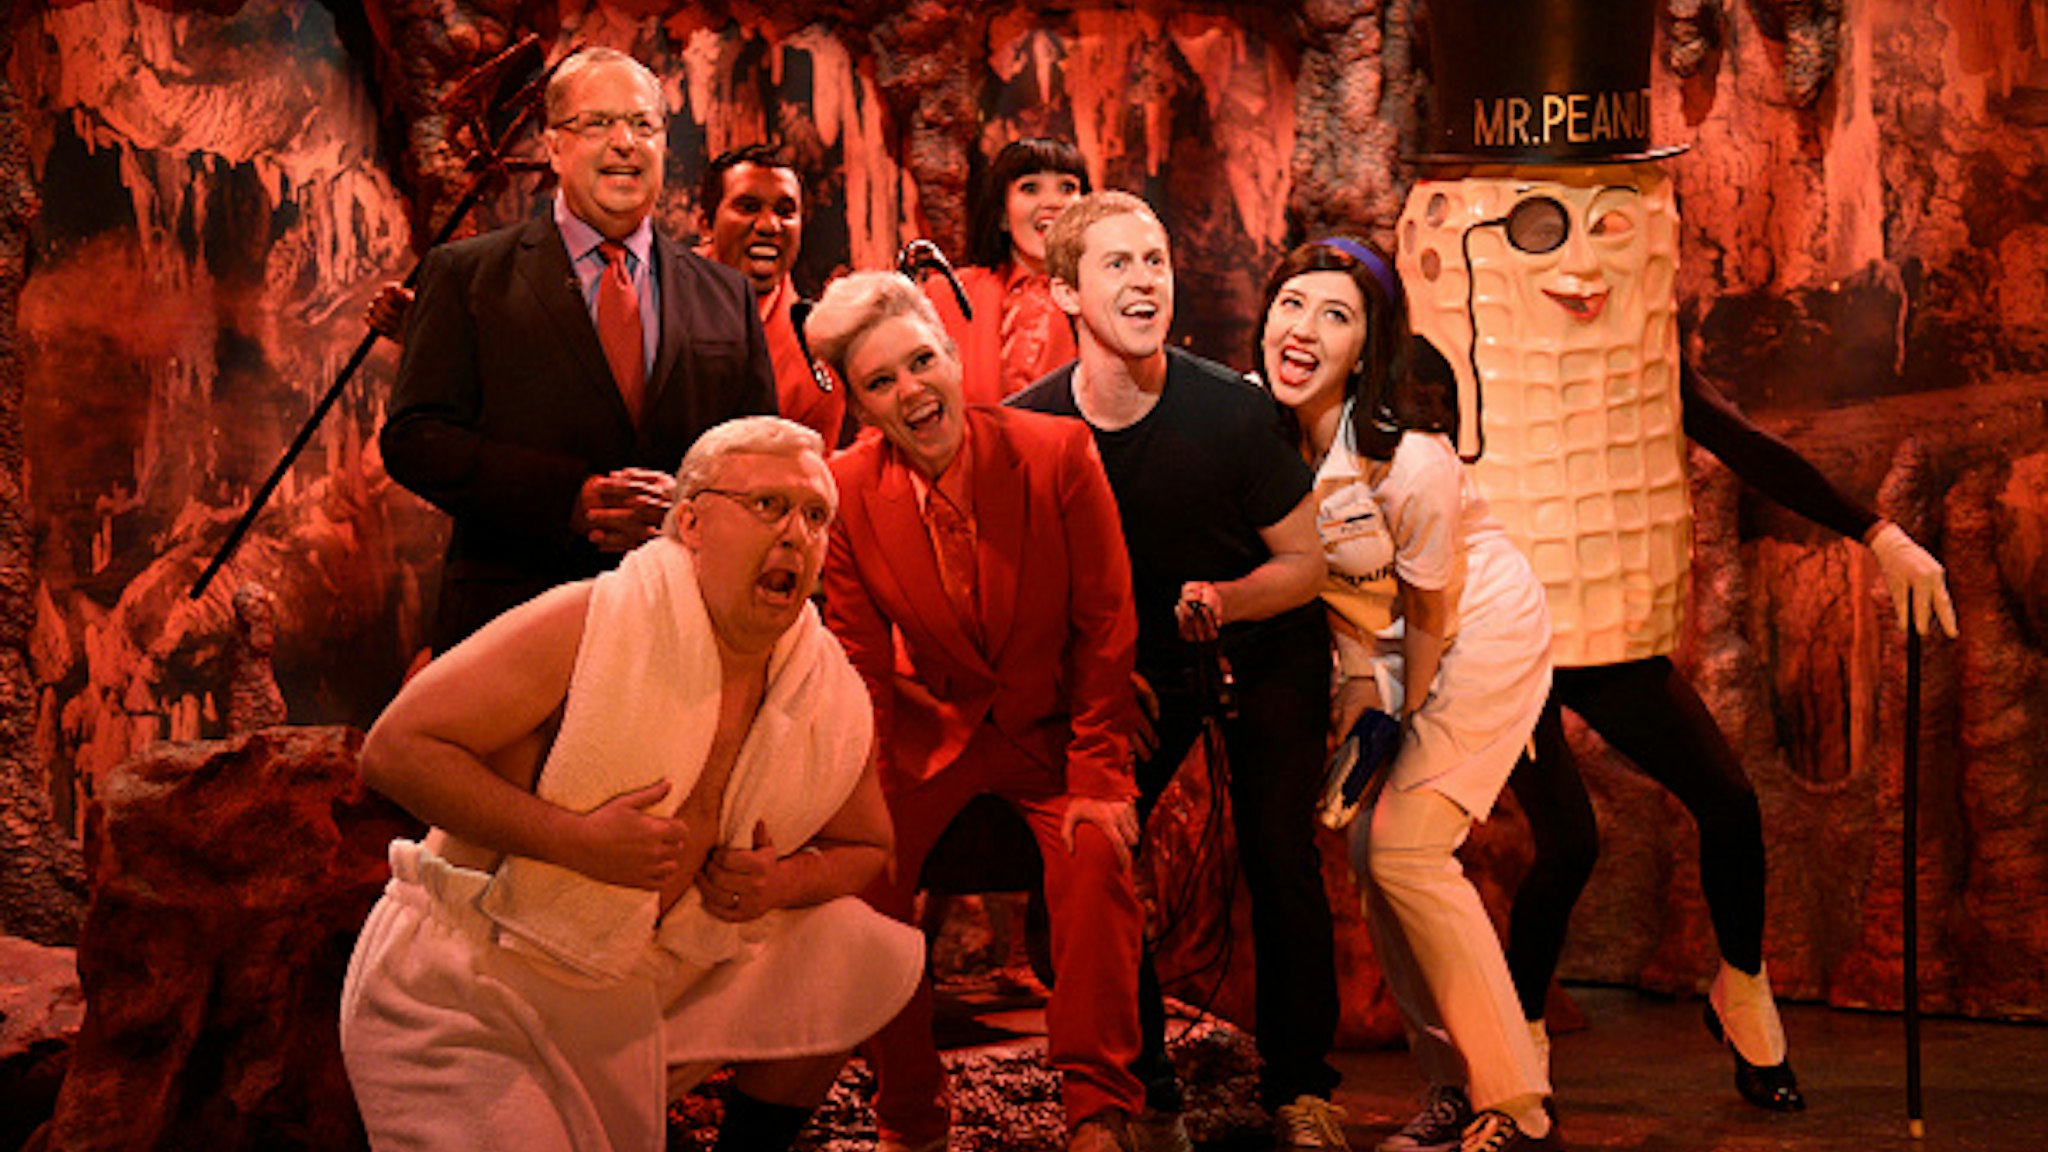 SATURDAY NIGHT LIVE -- "Adam Driver" Episode 1778 -- Pictured: (l-r) Jon Lovitz as Alan Dershowitz, Chris Redd as a demon, Beck Bennett as Mitch McConnell, Kate McKinnon as the Devil, Chloe Fineman as a demon, Alex Moffat as Mark Zuckerberg, Heidi Gardner as Flo, and Mikey Day as Mr. Peanut during the "Dershowitz Argues for Trump" Cold Open on Saturday, January 25, 2020 --